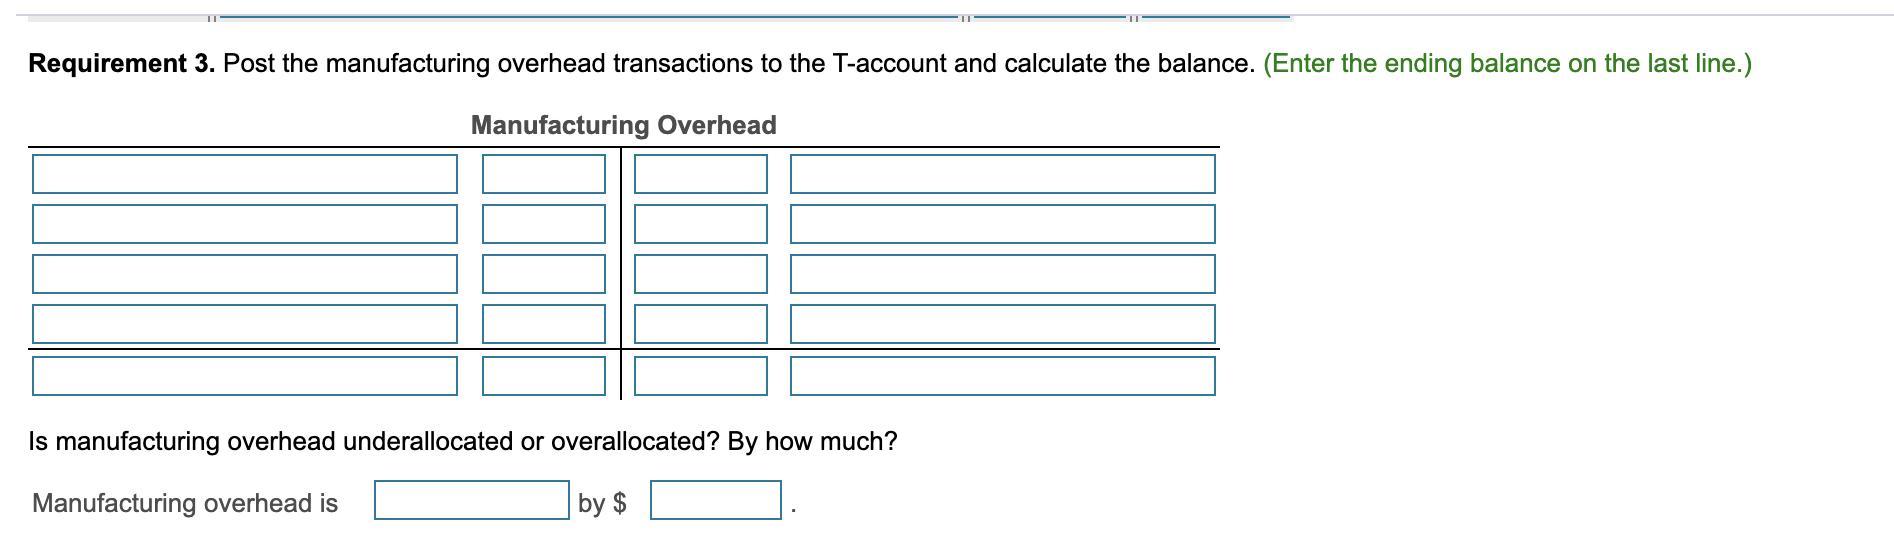 Requirement 3. Post the manufacturing overhead transactions to the T-account and calculate the balance. (Enter the ending bal